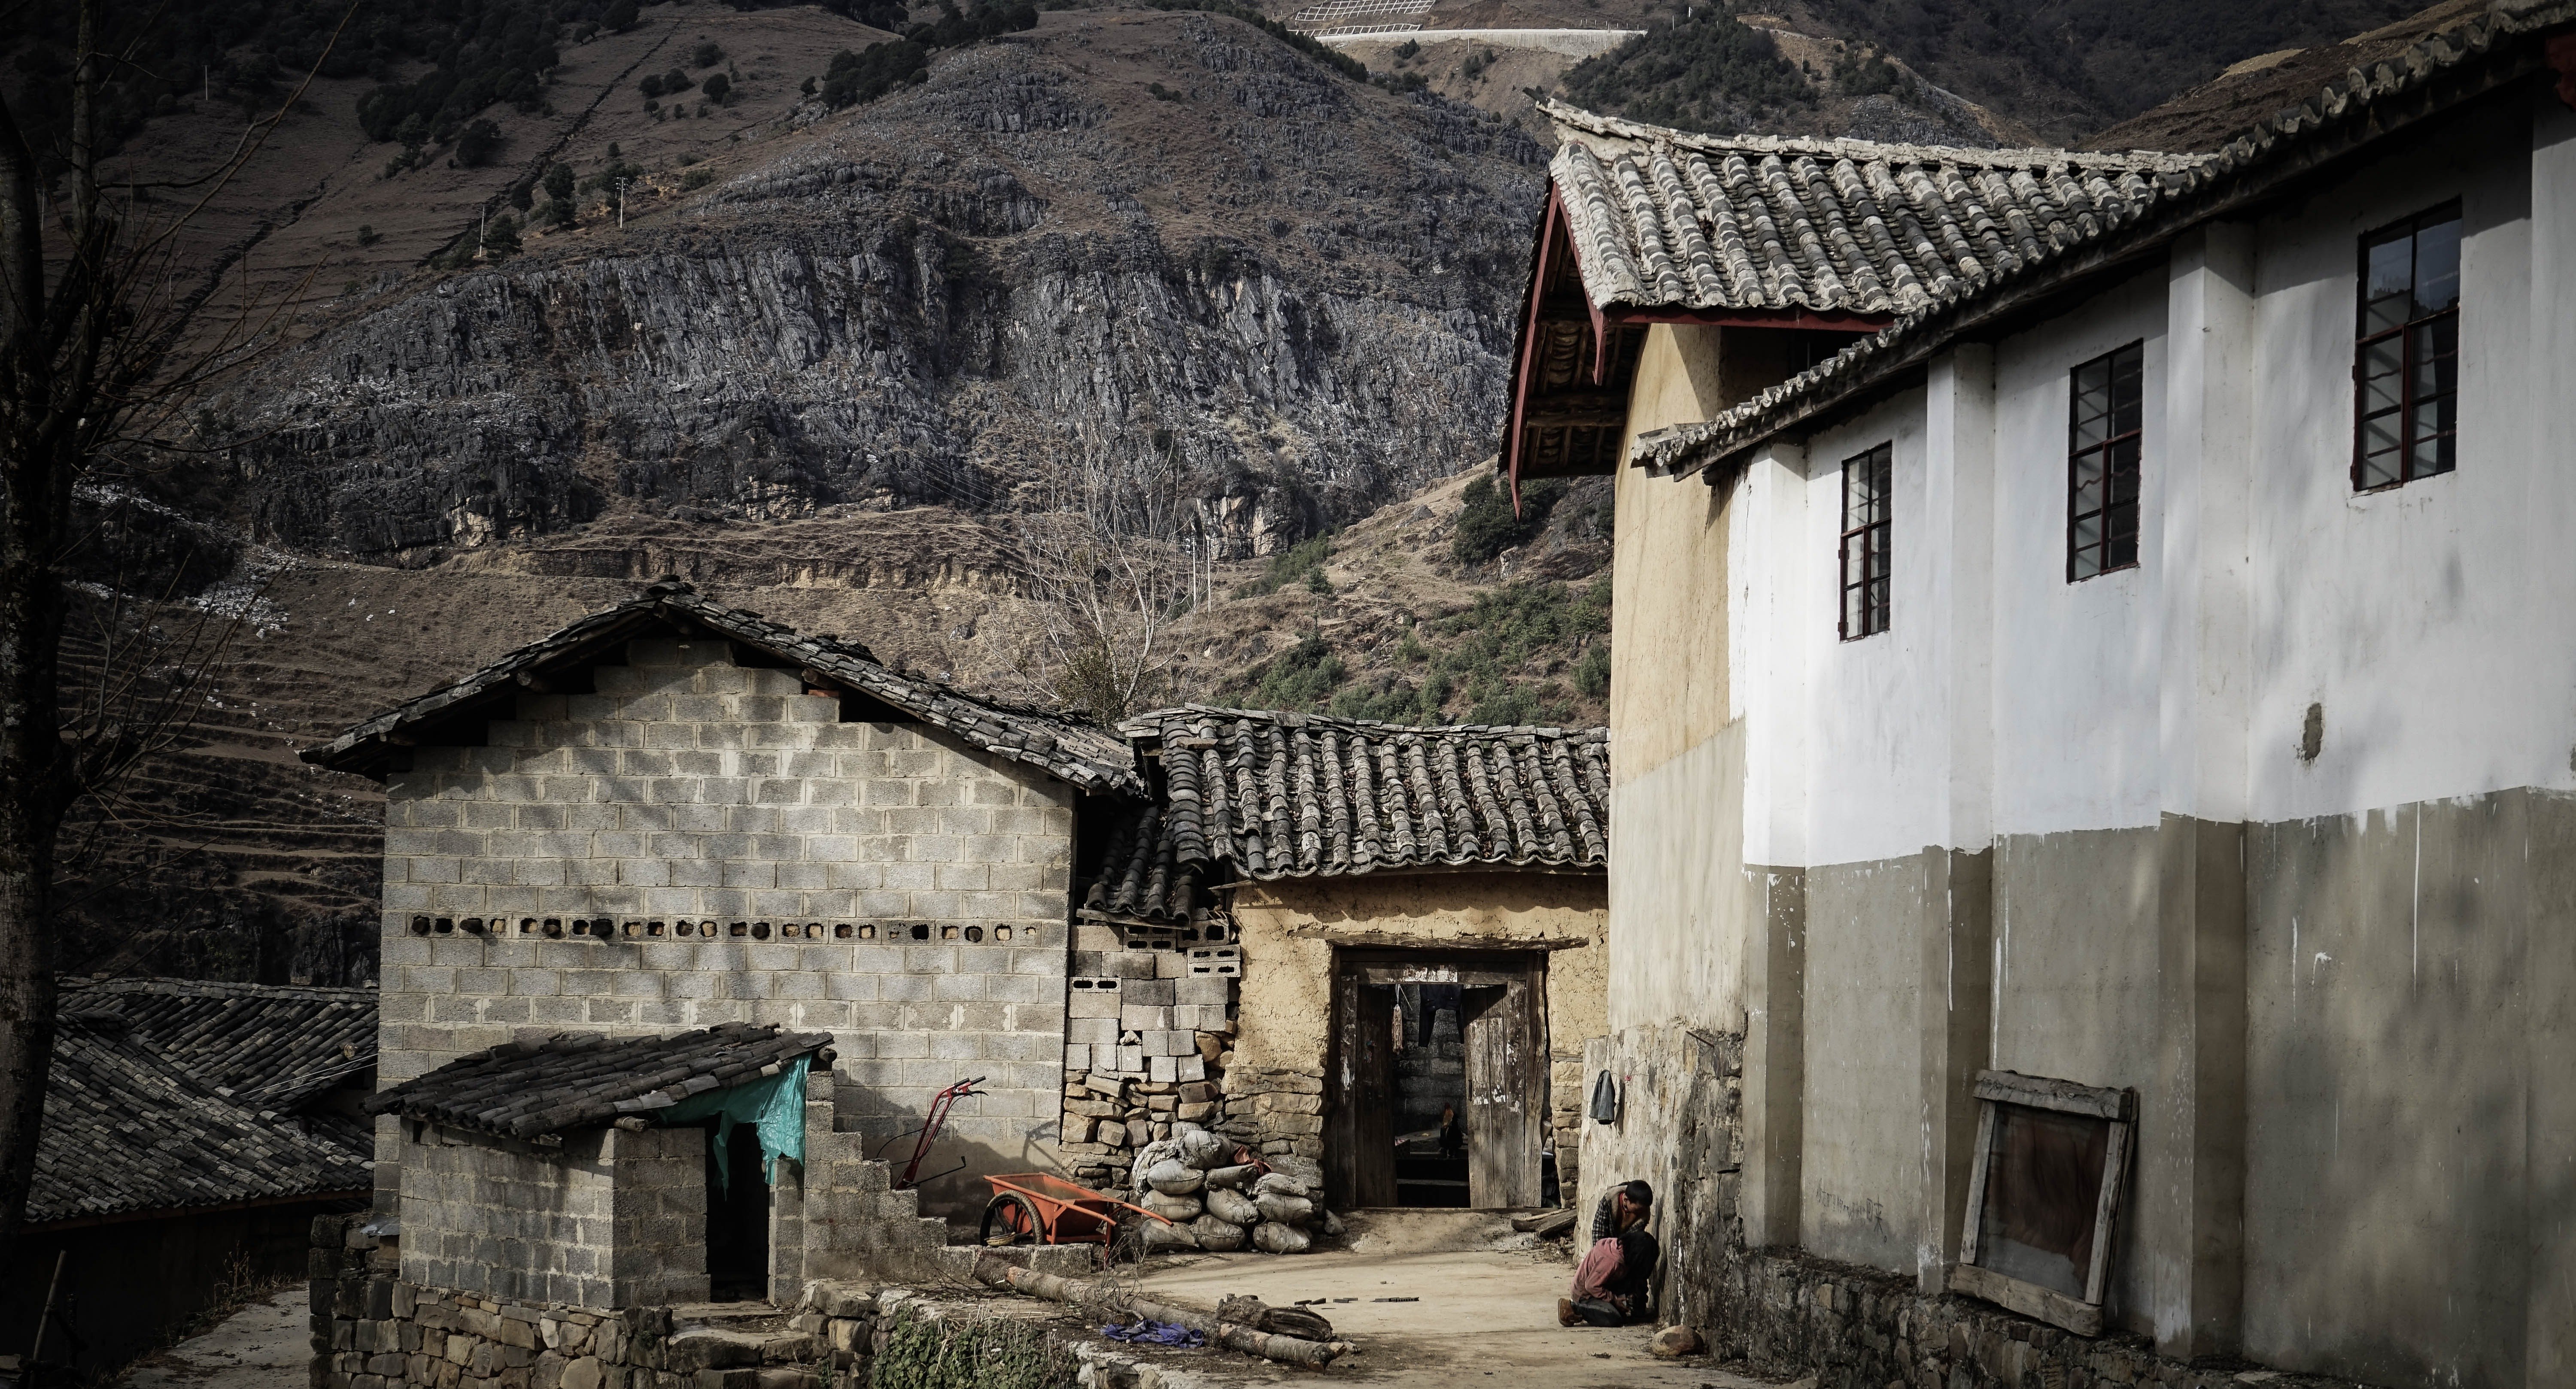 Pictured - A village near a mountain cliff | Source: Pexels 